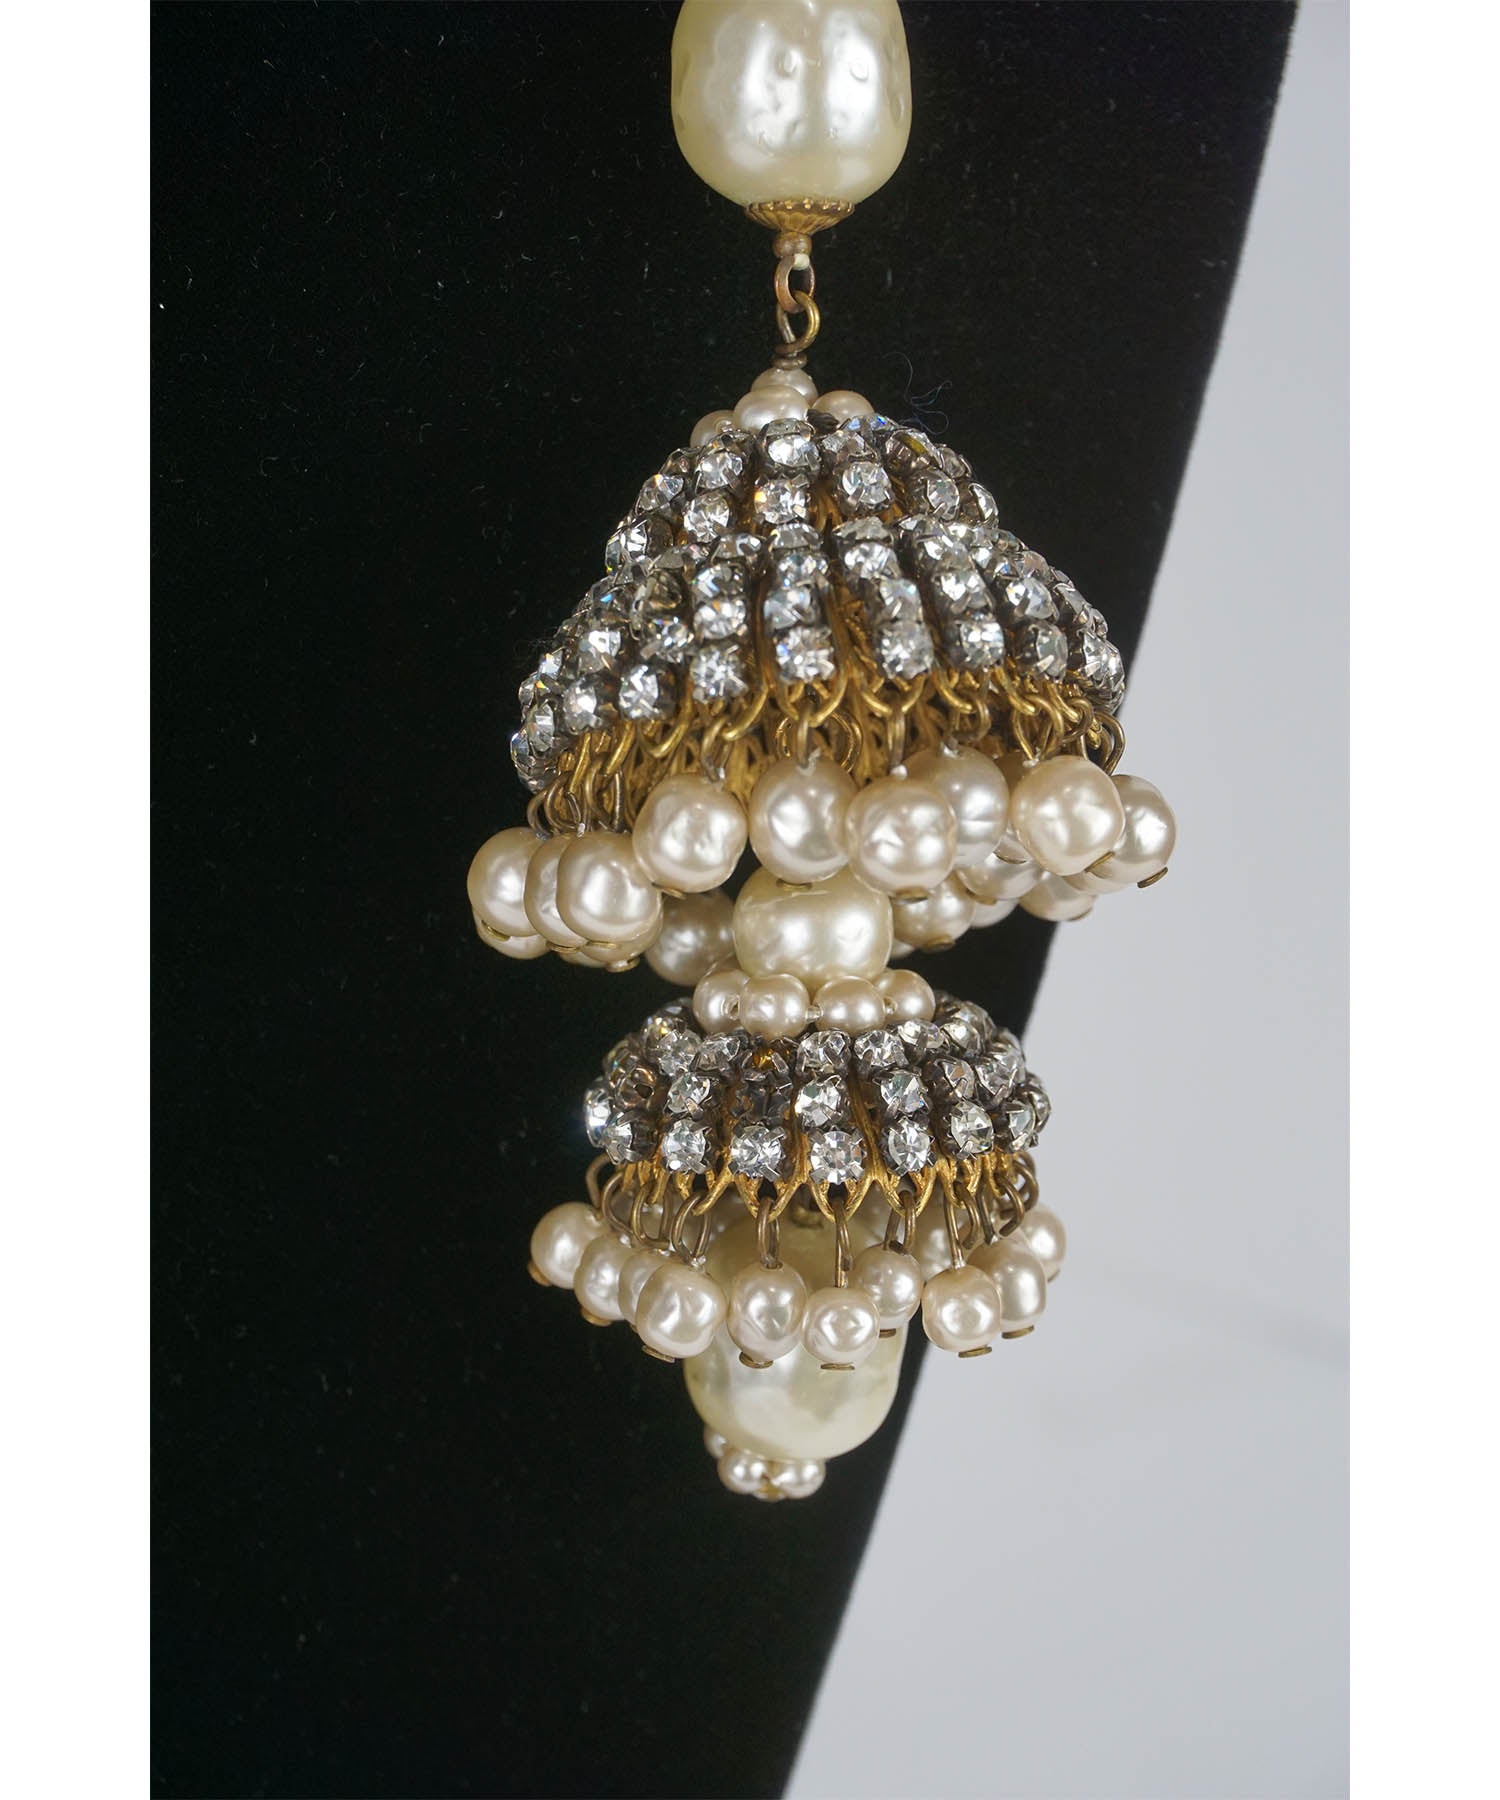 Vintage 1940s Pearl & Crystal Lariat Necklace - Foxy Couture Carmel